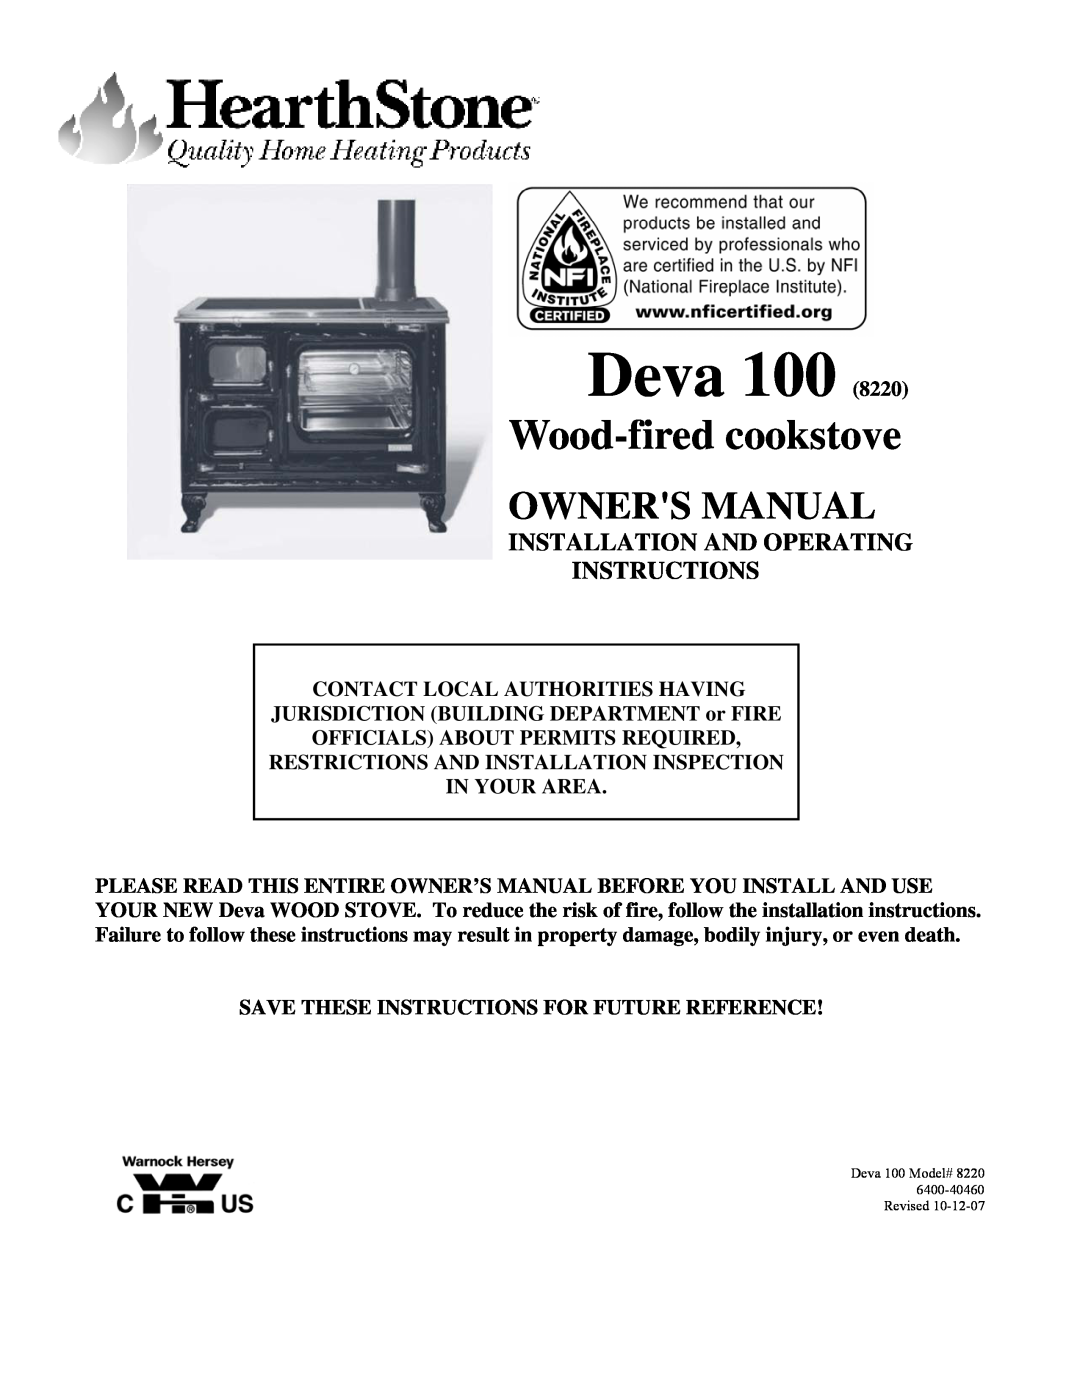 Weiman Products Deva 100 owner manual Installation And Operating Instructions, Wood-firedcookstove 